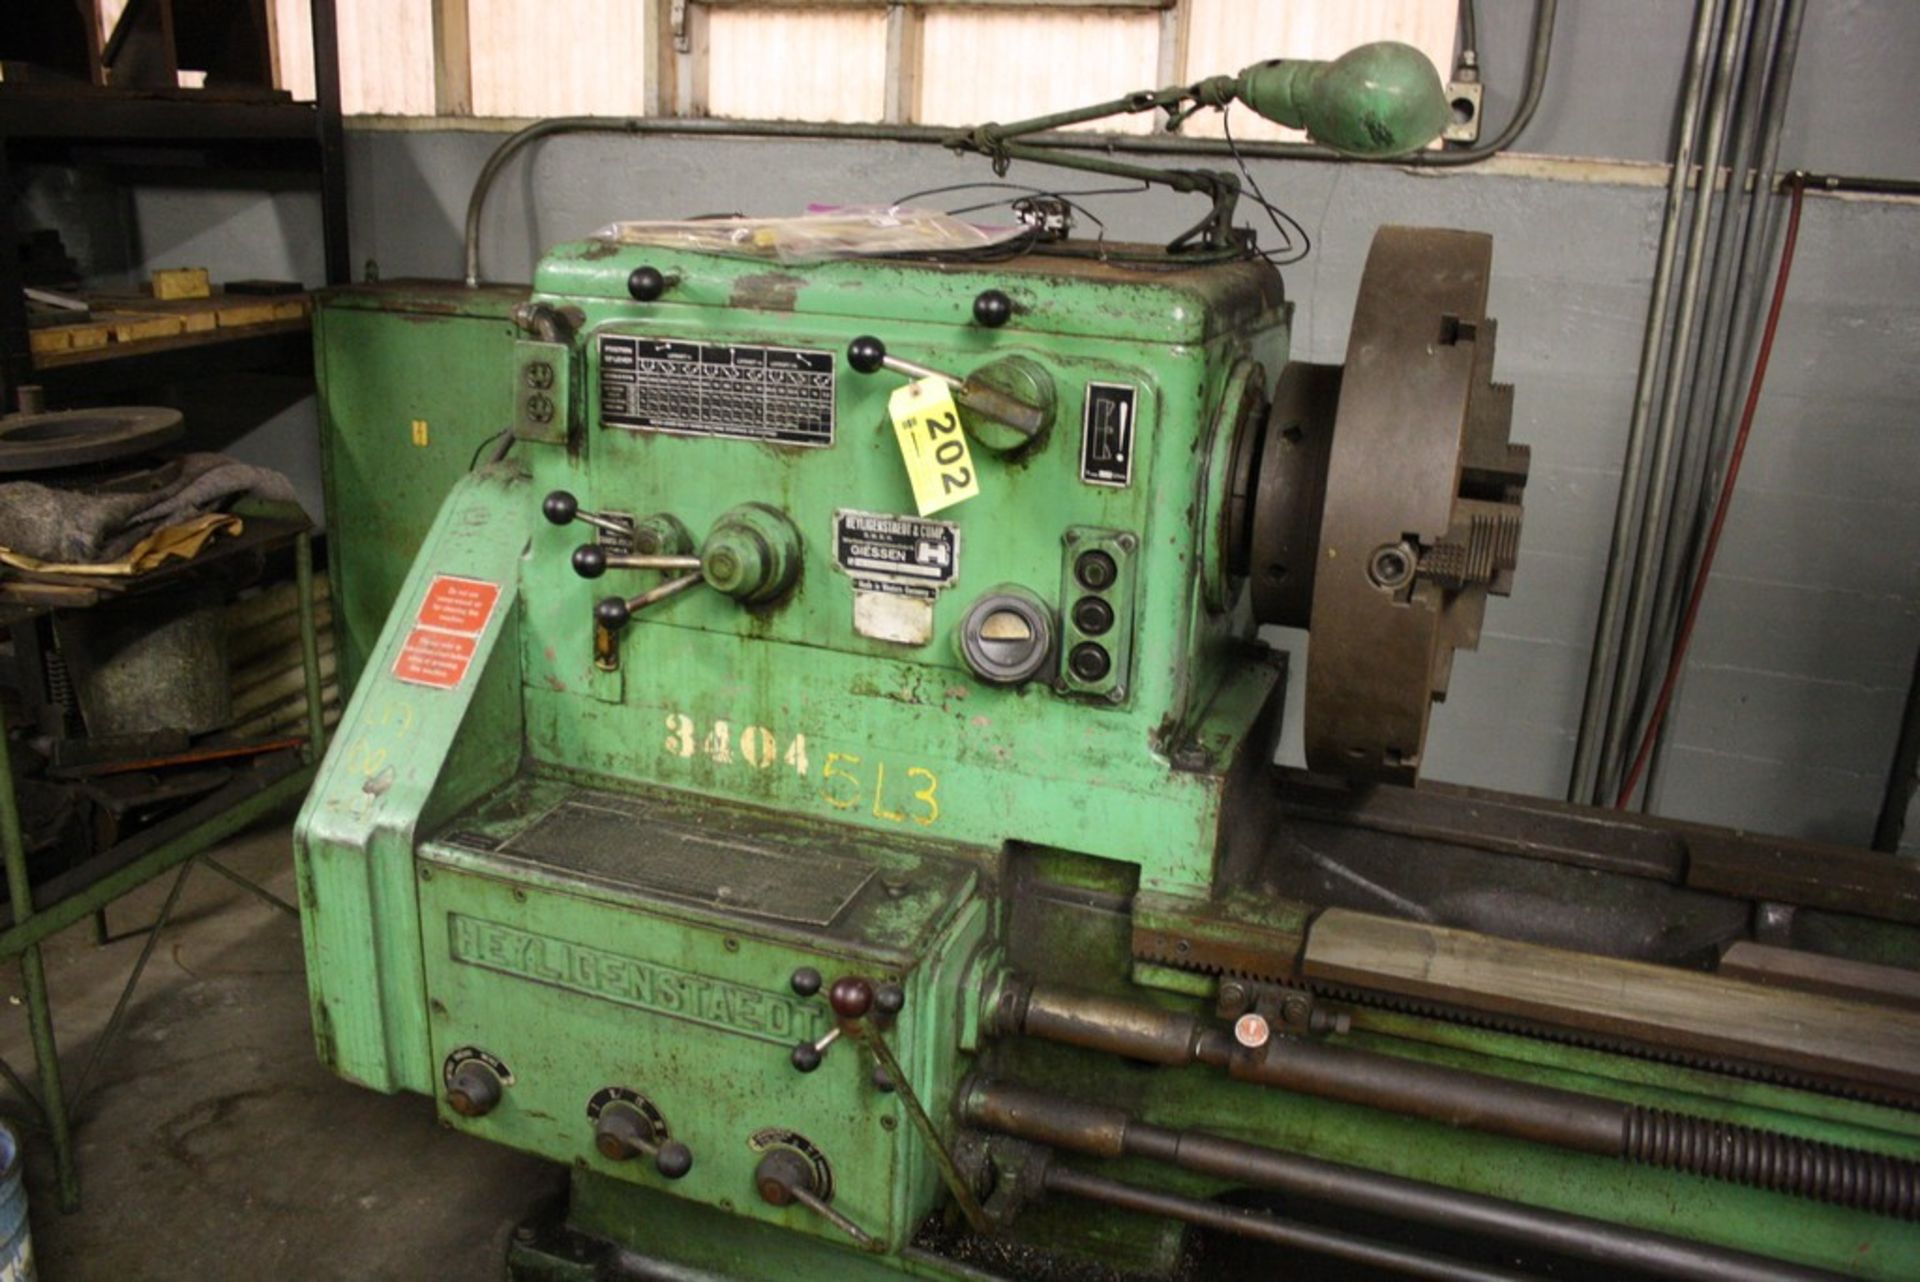 HEYLIGENSTAEDT 36" X84" TOOL ROOM LATHE, S/N 6061-1957, 560 RPM SPINDLE, 24" 4-JAW CHUCK, TAPER - Image 2 of 5